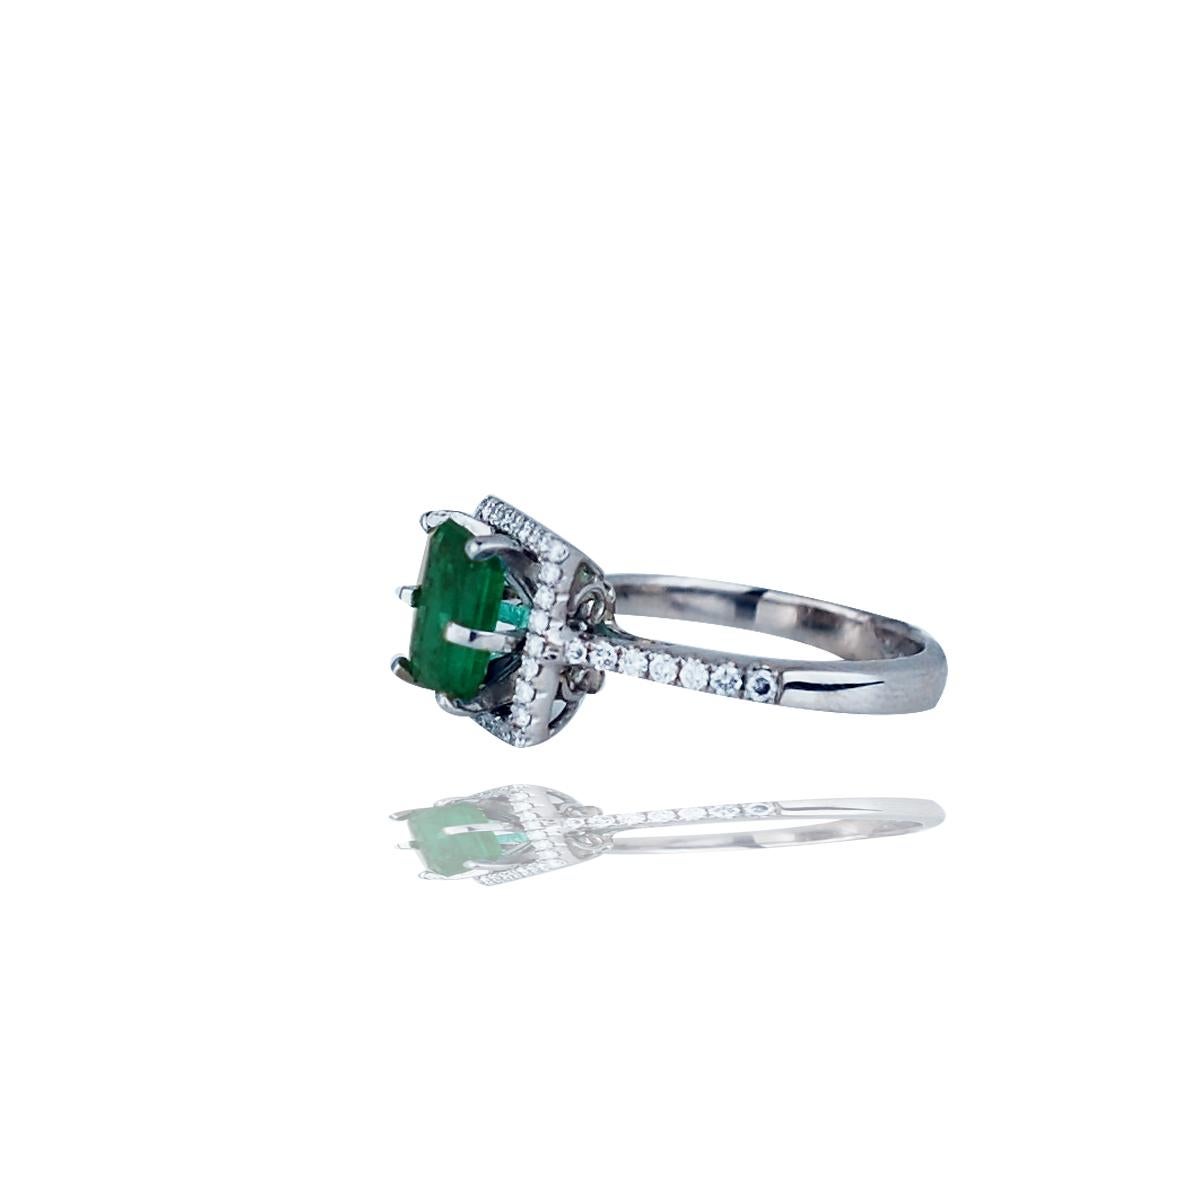 Oval Cut 2.48 Carat Colombian Emerald and Diamond Halo Ring